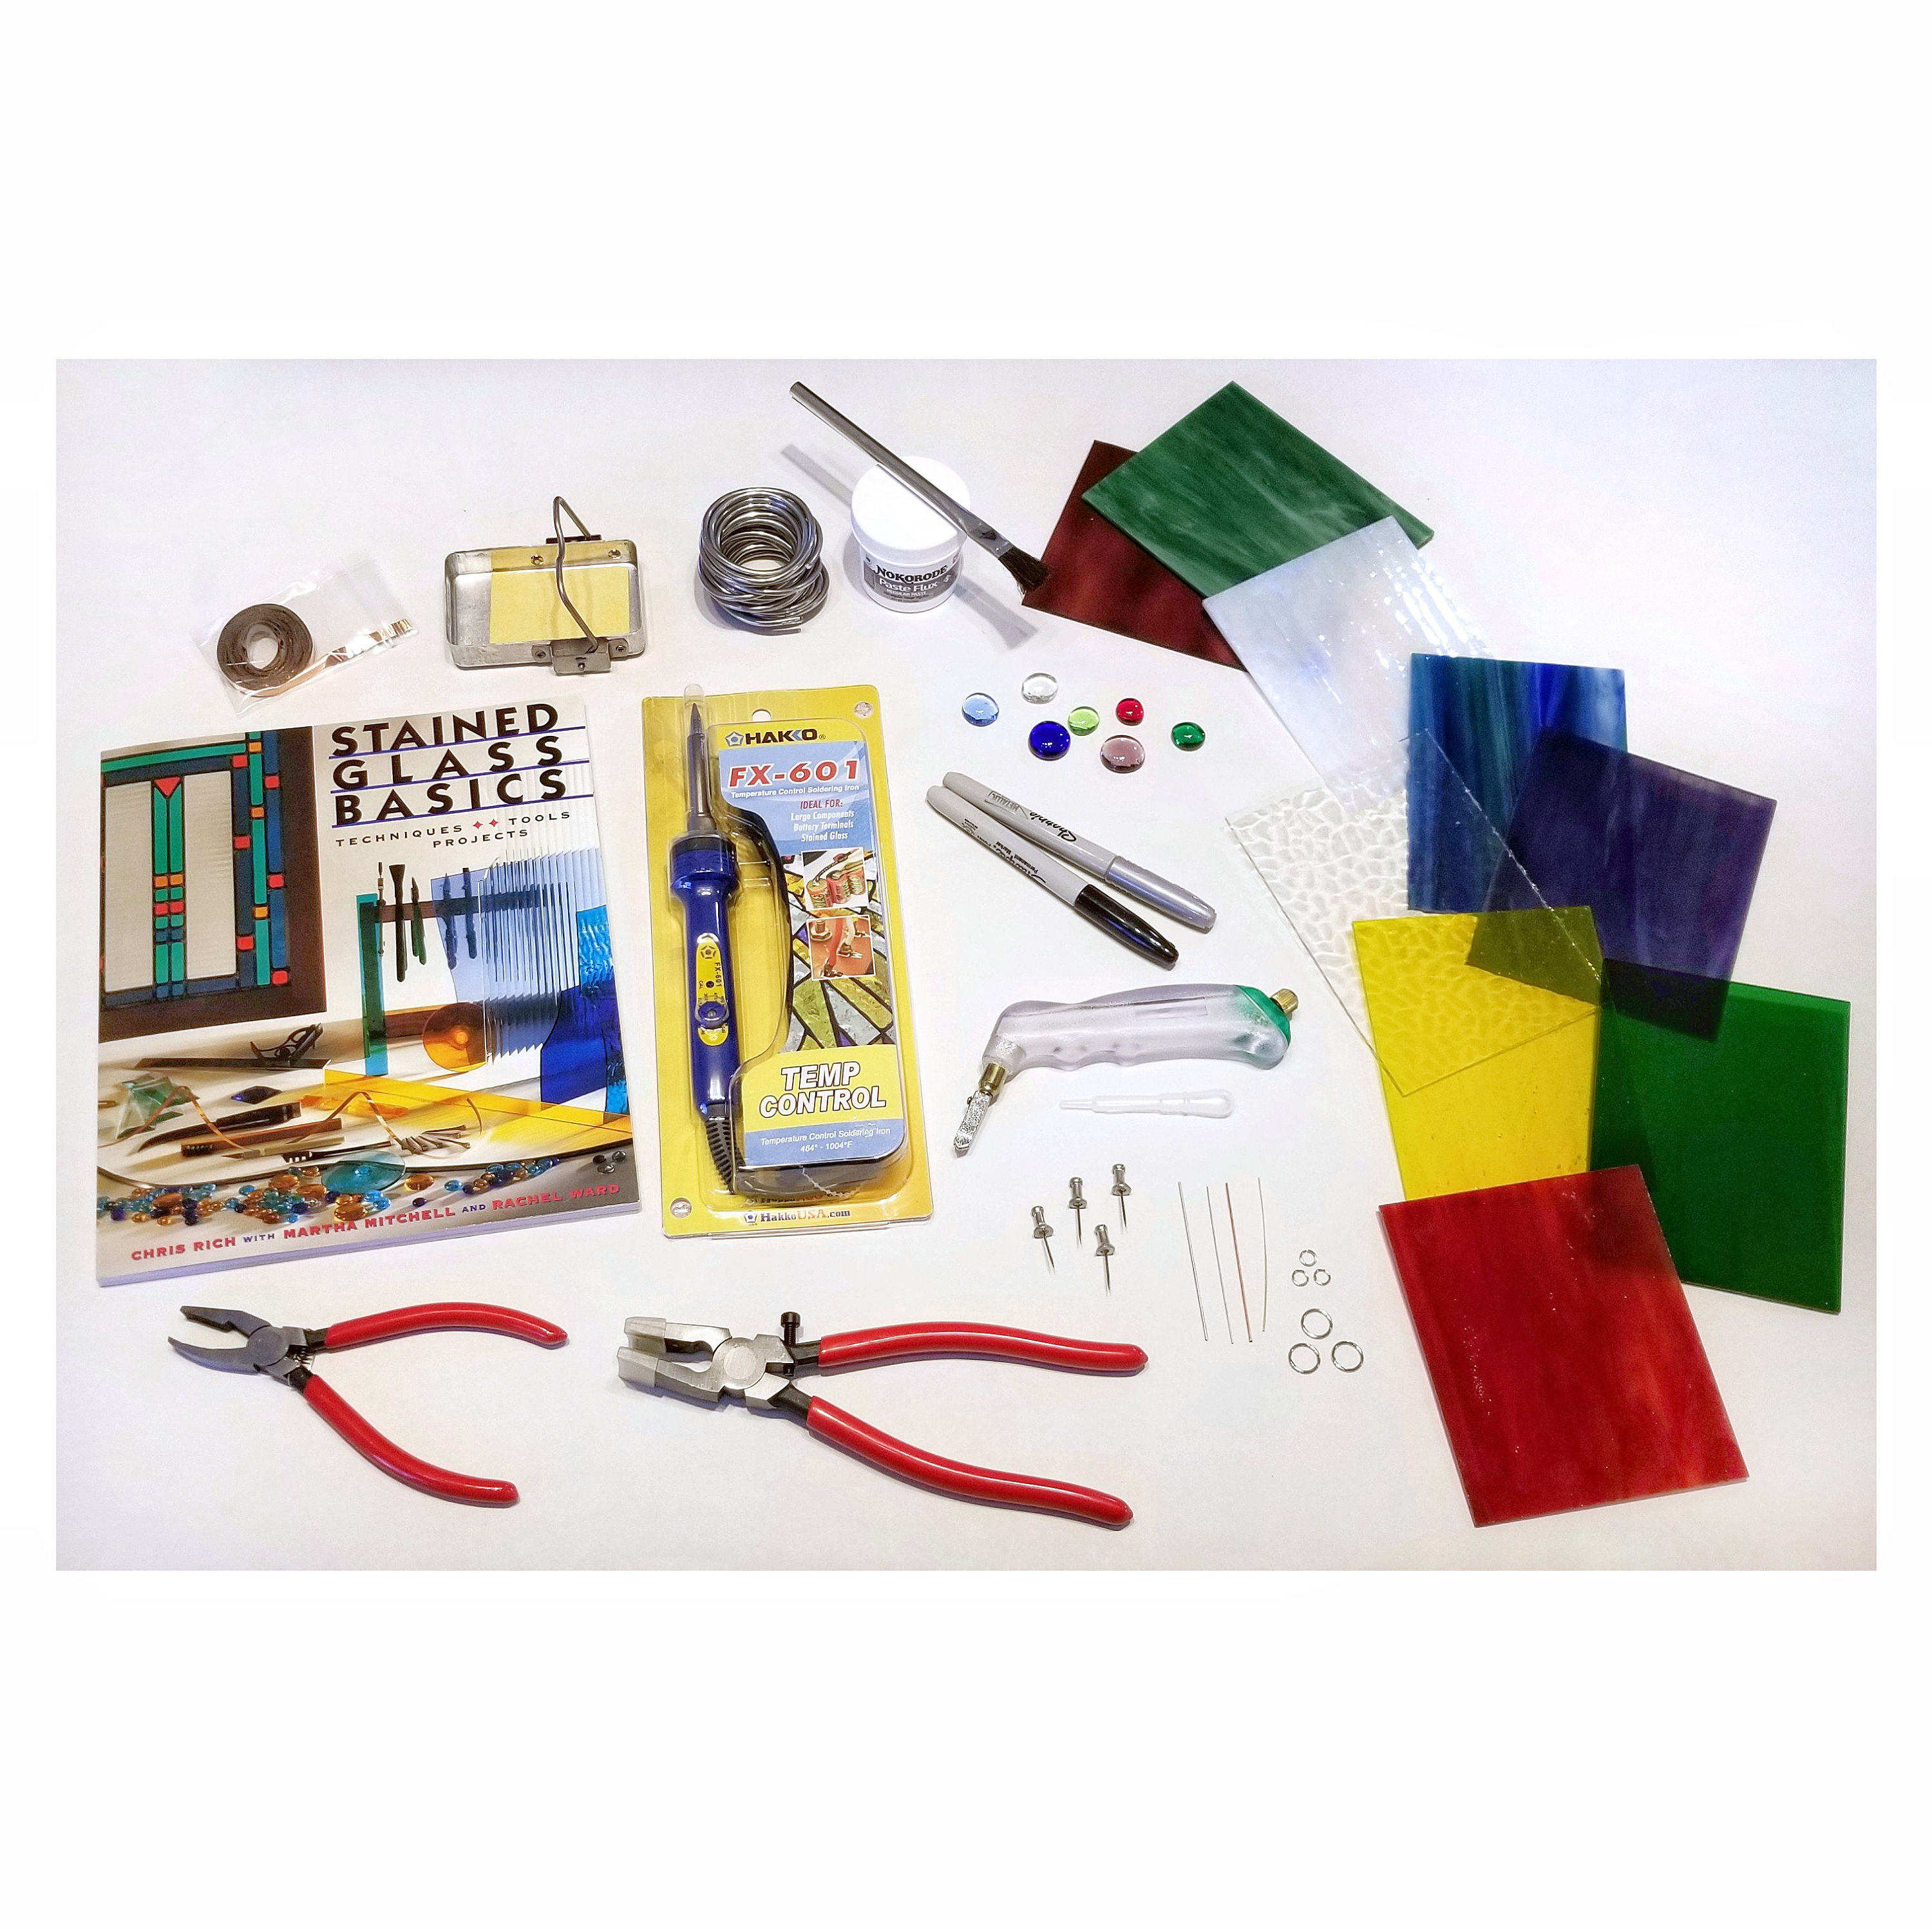 Stained Glass Beginner Tool Kit With Hakko Soldering Iron, Palm